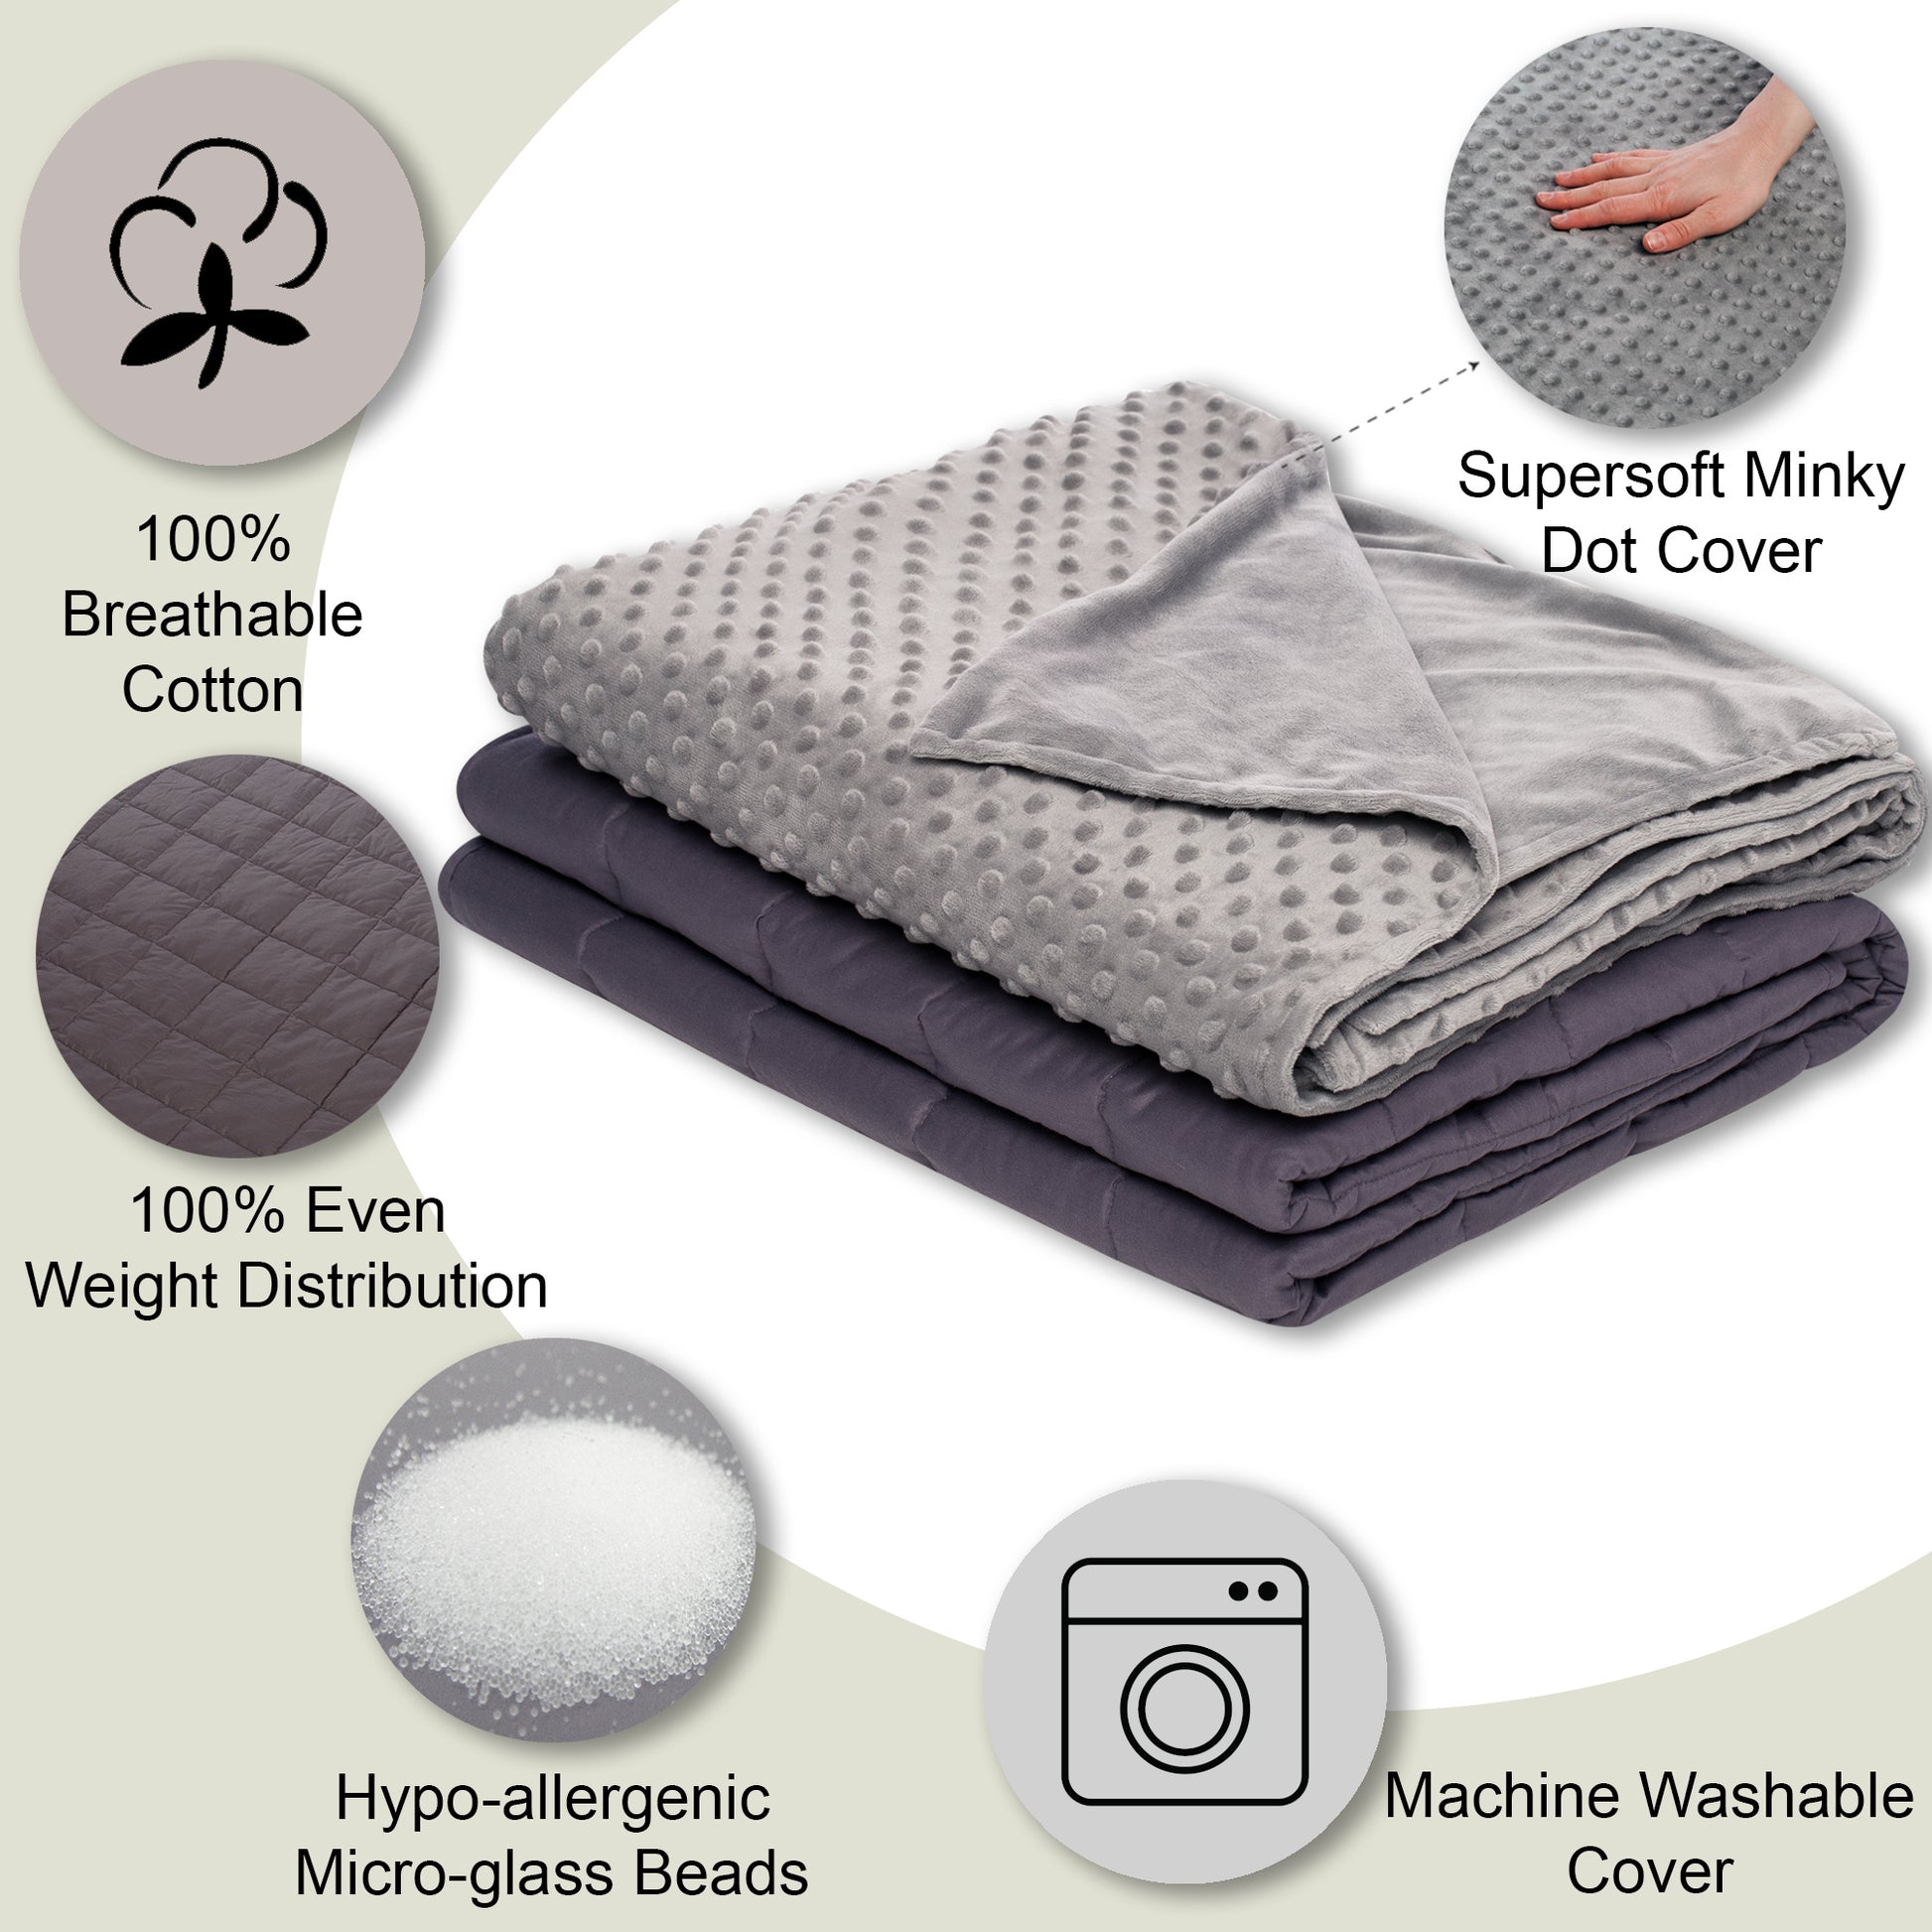 Super Soft 10 lbs Weighted Blanket for Kids & Removable Cover - 41 x 60 inch Weighted Blankets with Glass Beads Single Size - Kids Heavy Blanket for Girls and Boys - Grey - Hazli Collection 